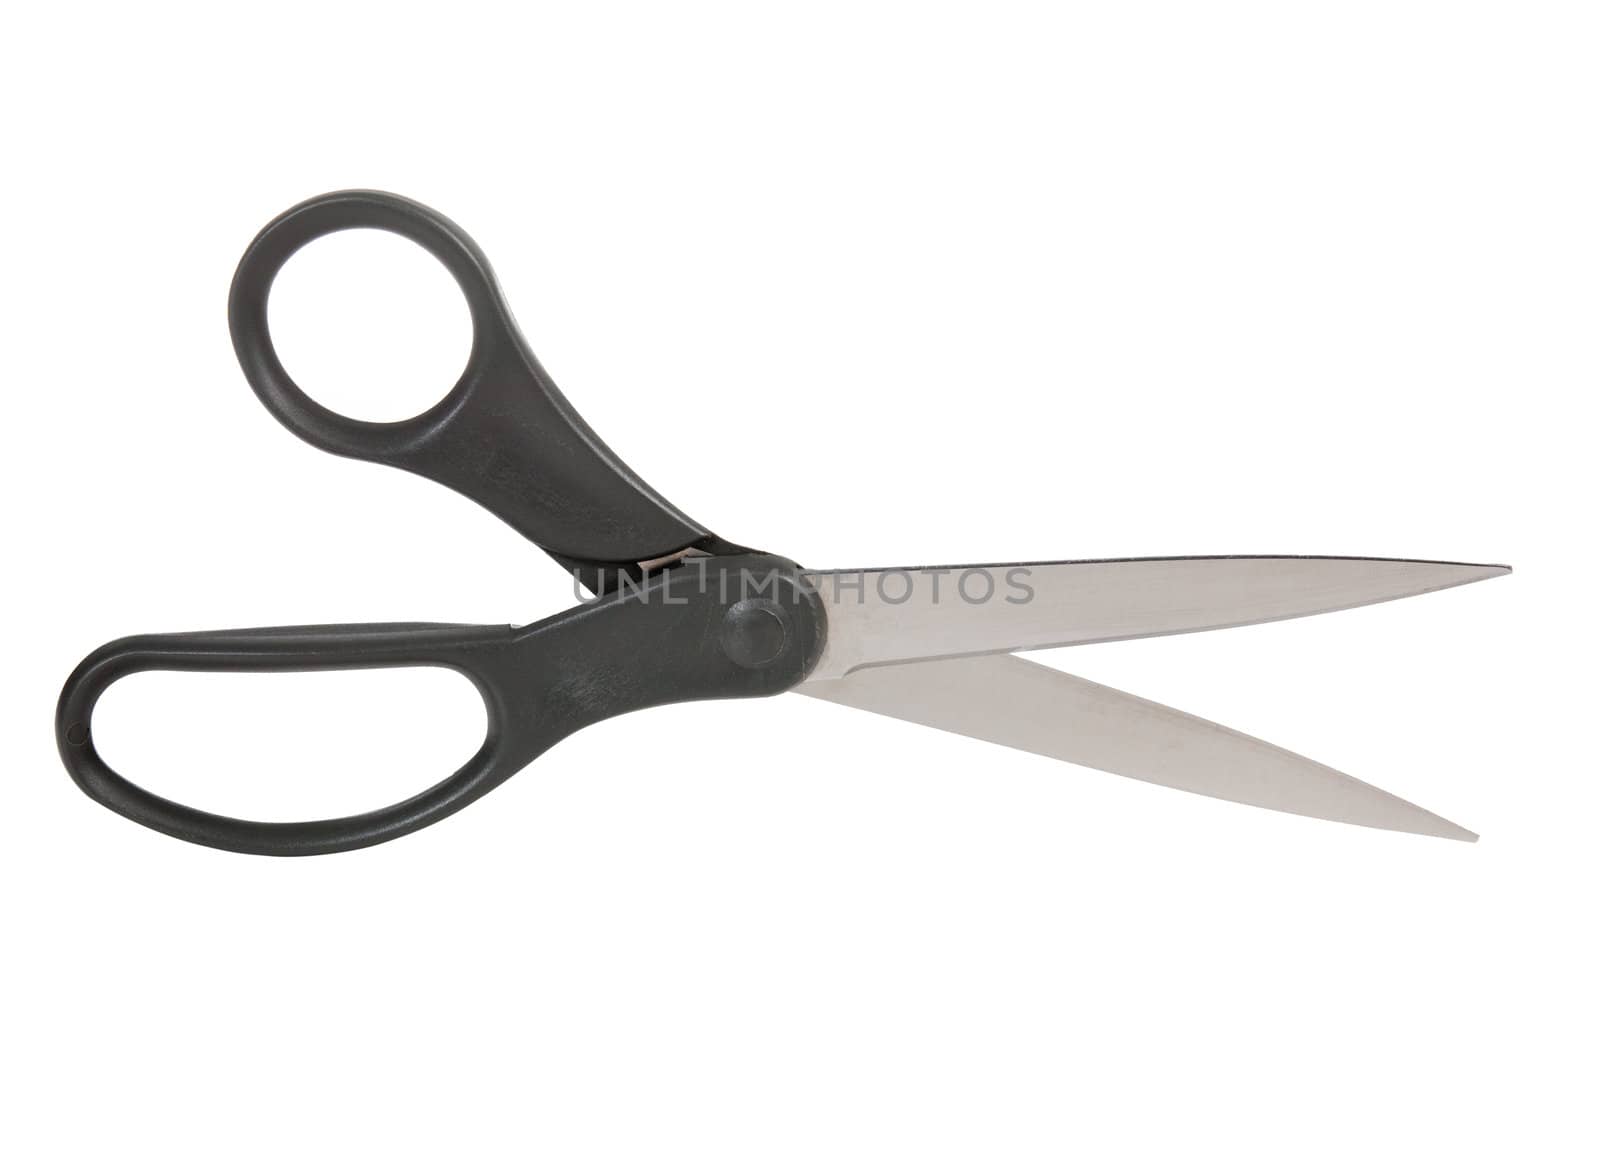 Isolated set of modern scissors by steheap